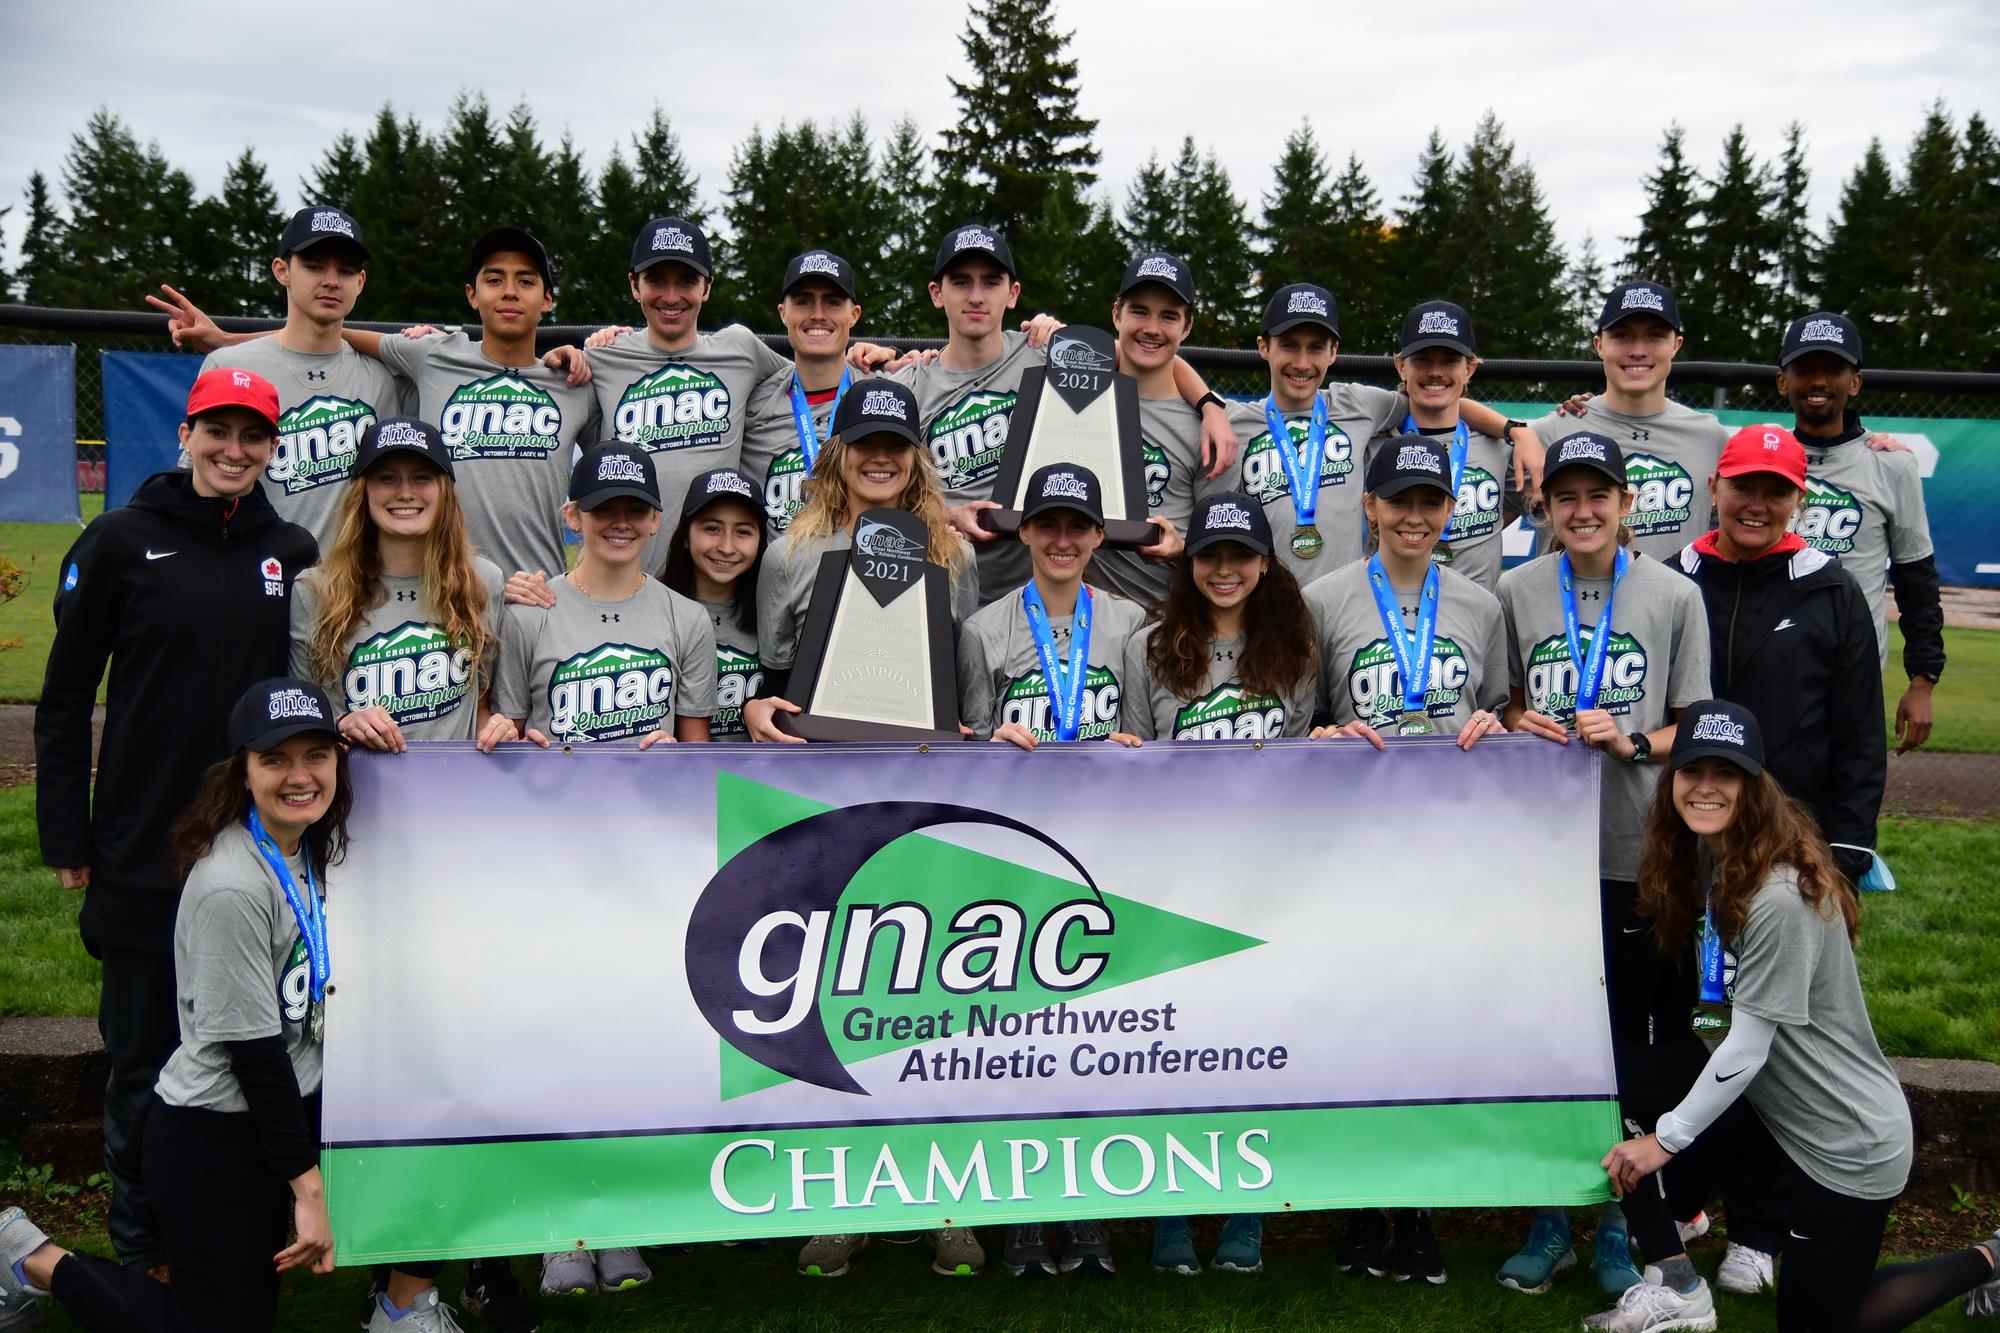 A photo of SFU's cross country team holding the GNAC Championship banner after winning.